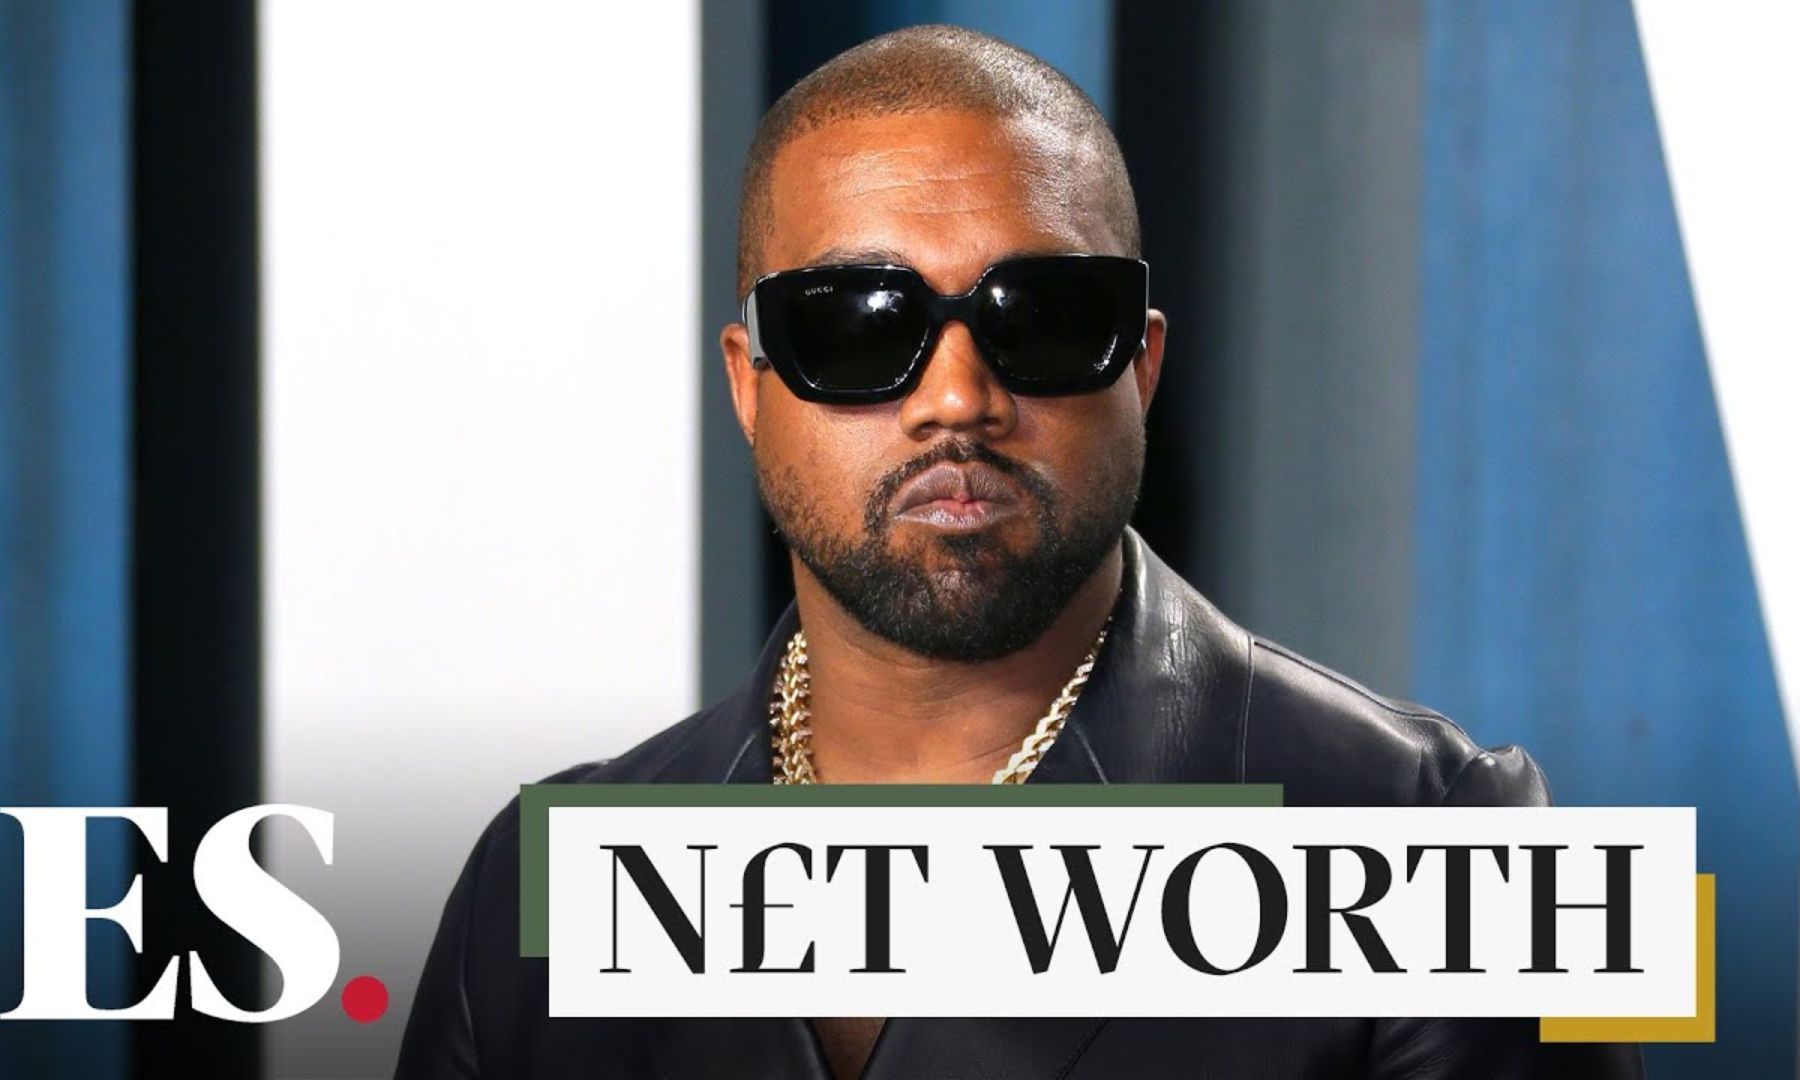 What Is Kanye West's Net Worth